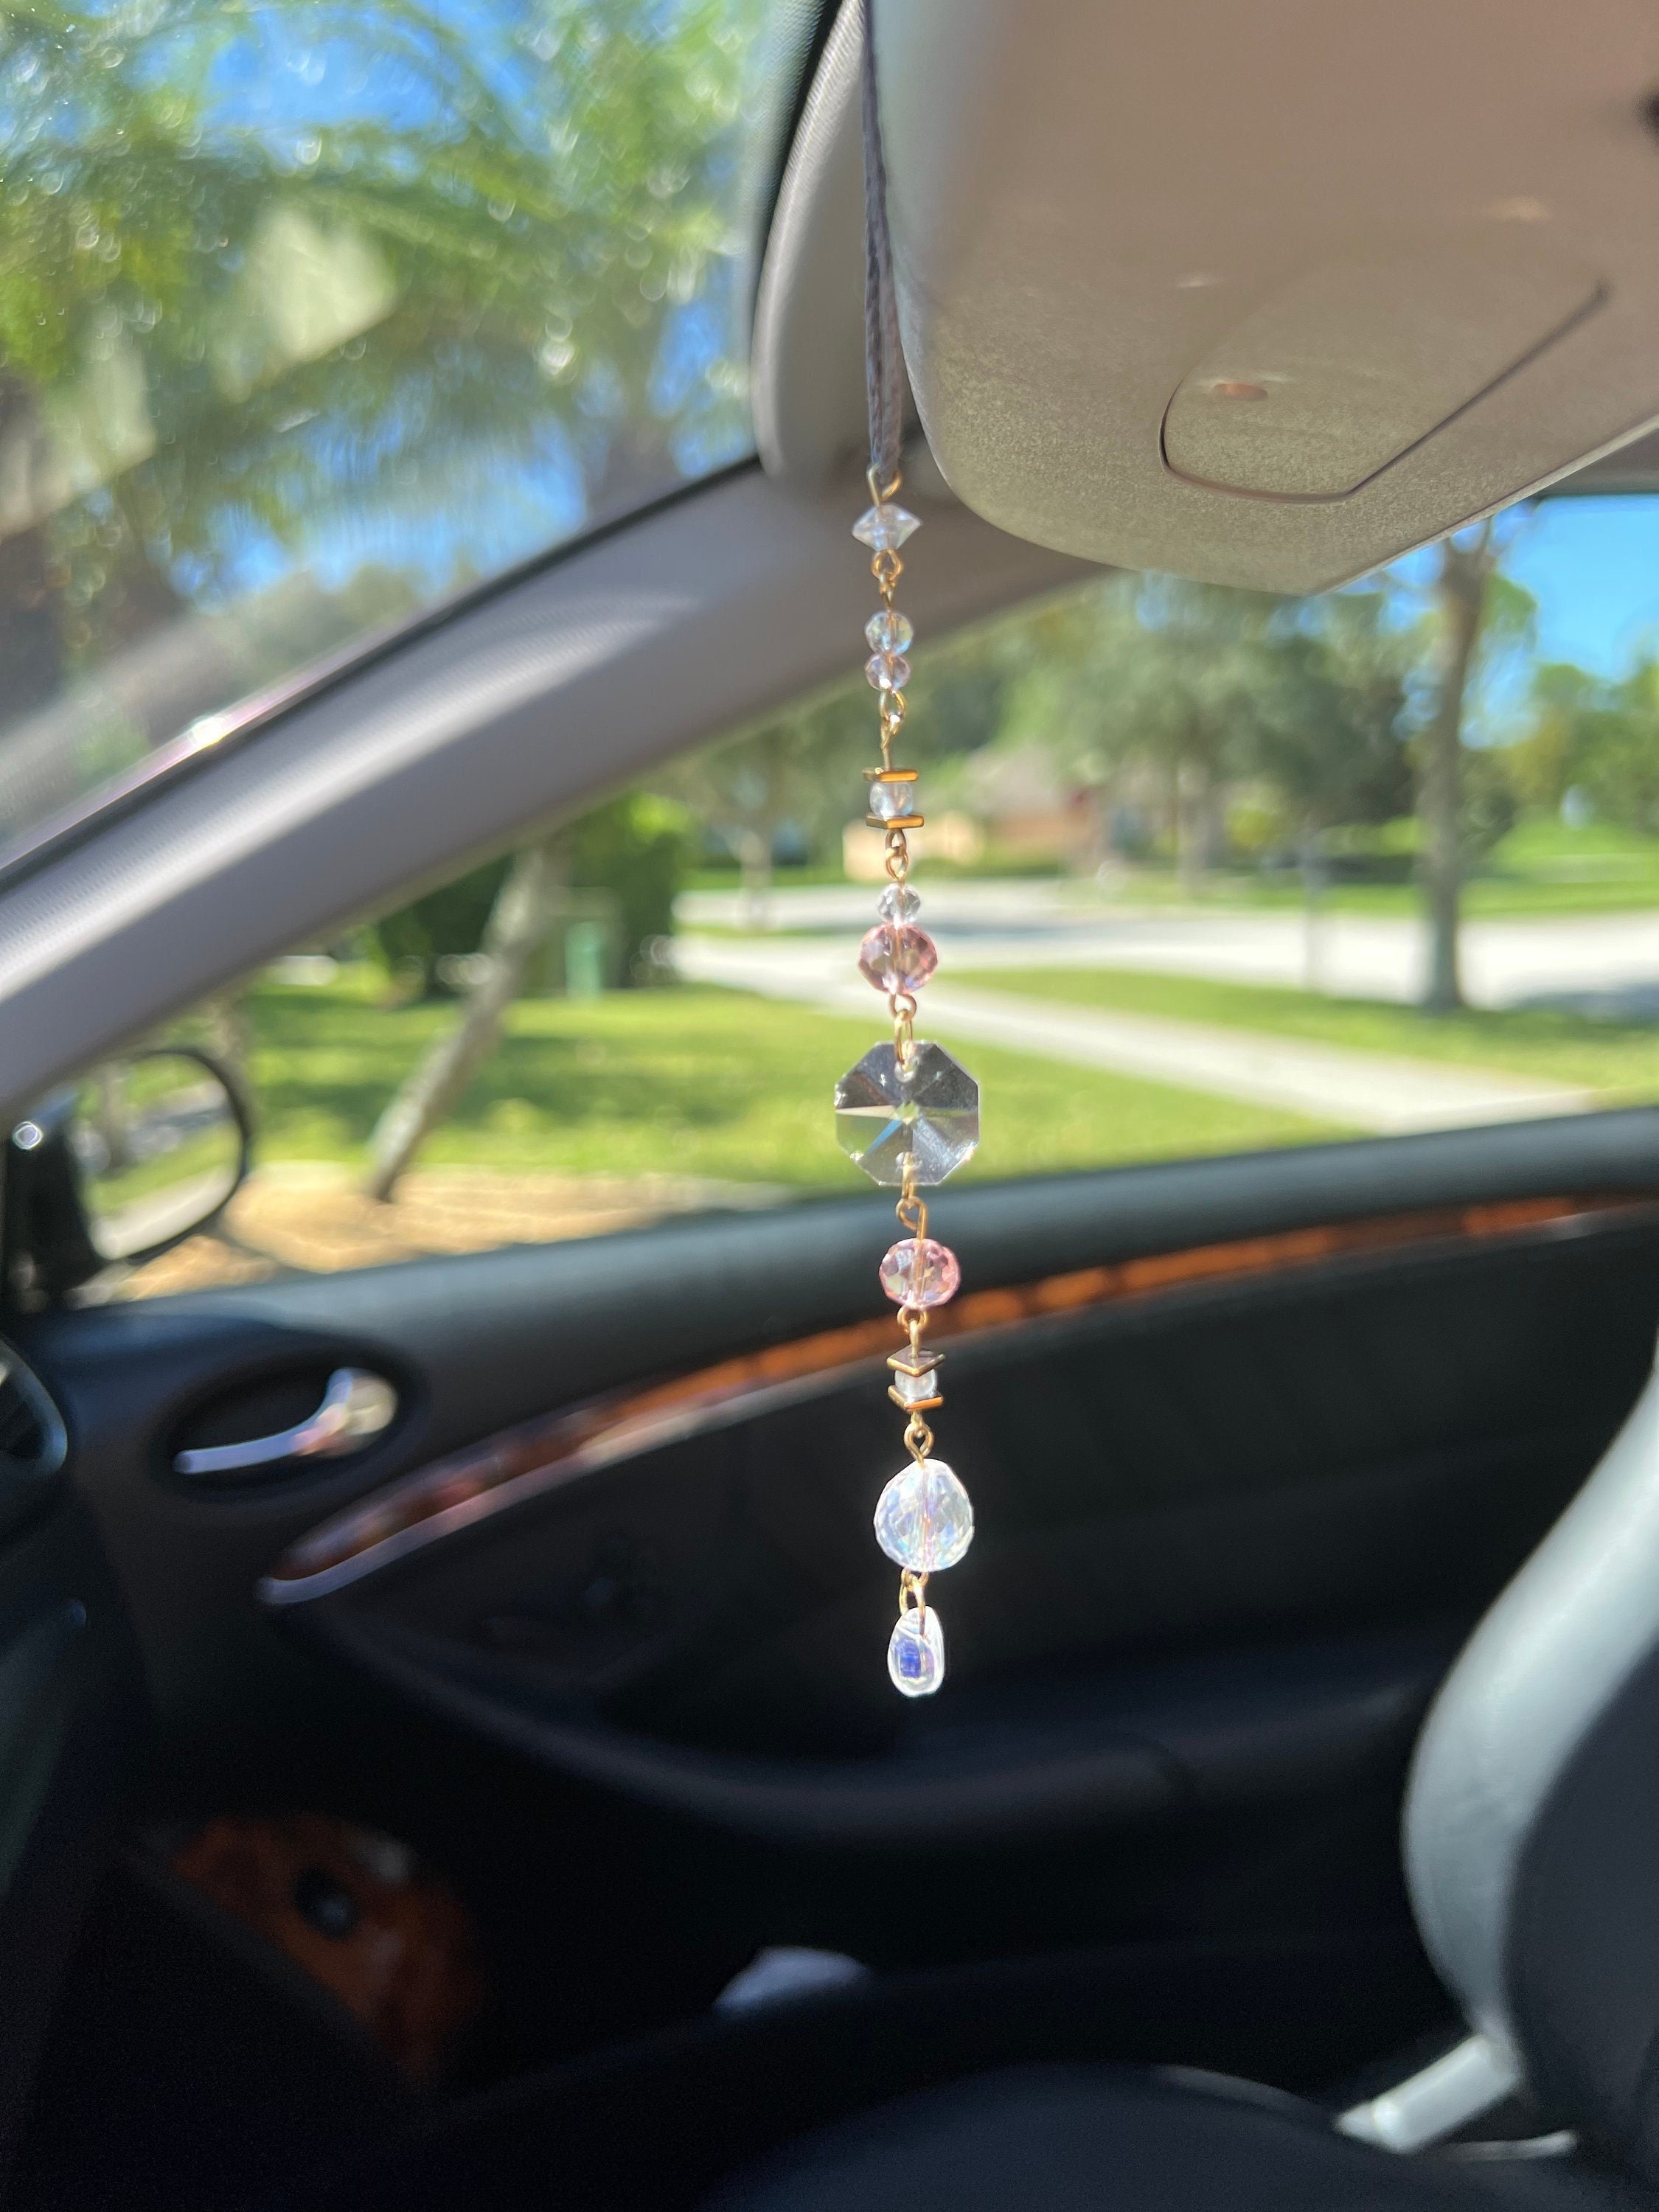 Cute & Colorful Rearview Mirror Charms - Shop Now - Natural Life